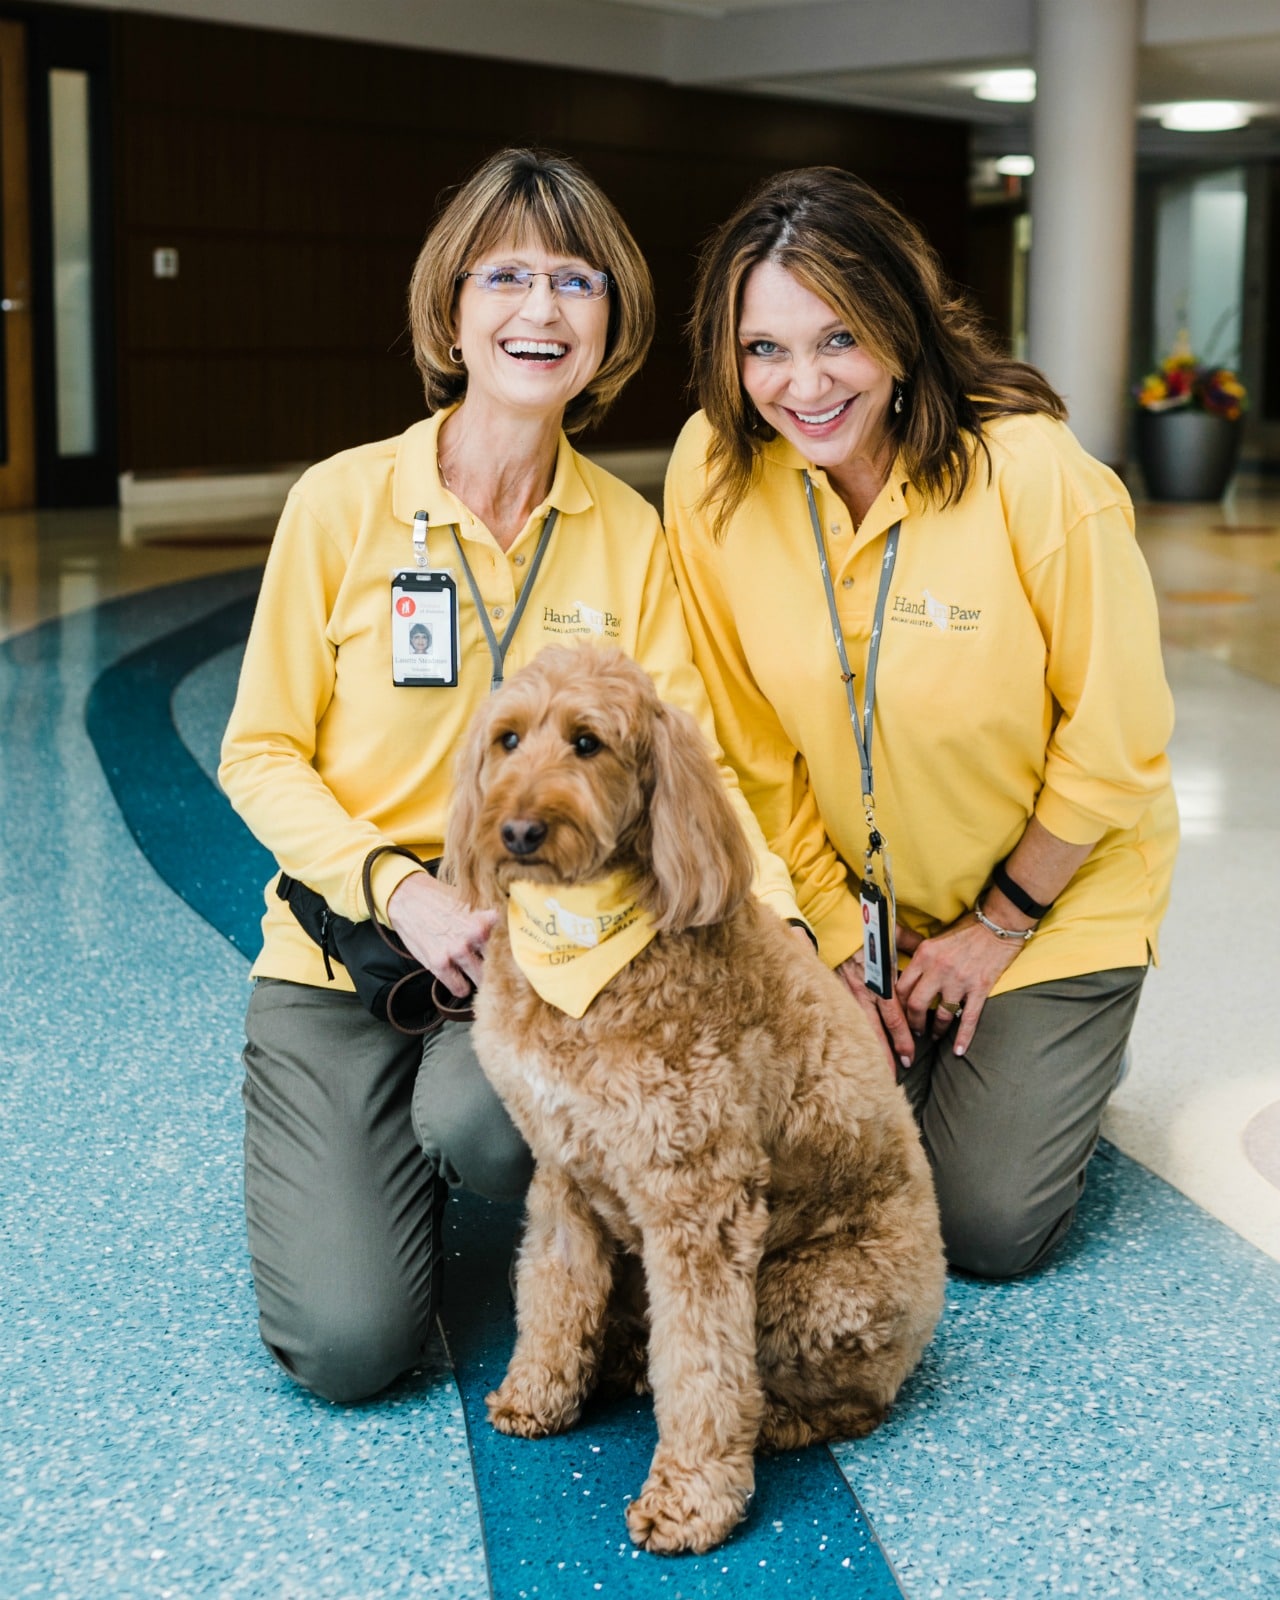 Hand in Paw plans to grow their Animal-Assisted Therapy Team family with a new training program